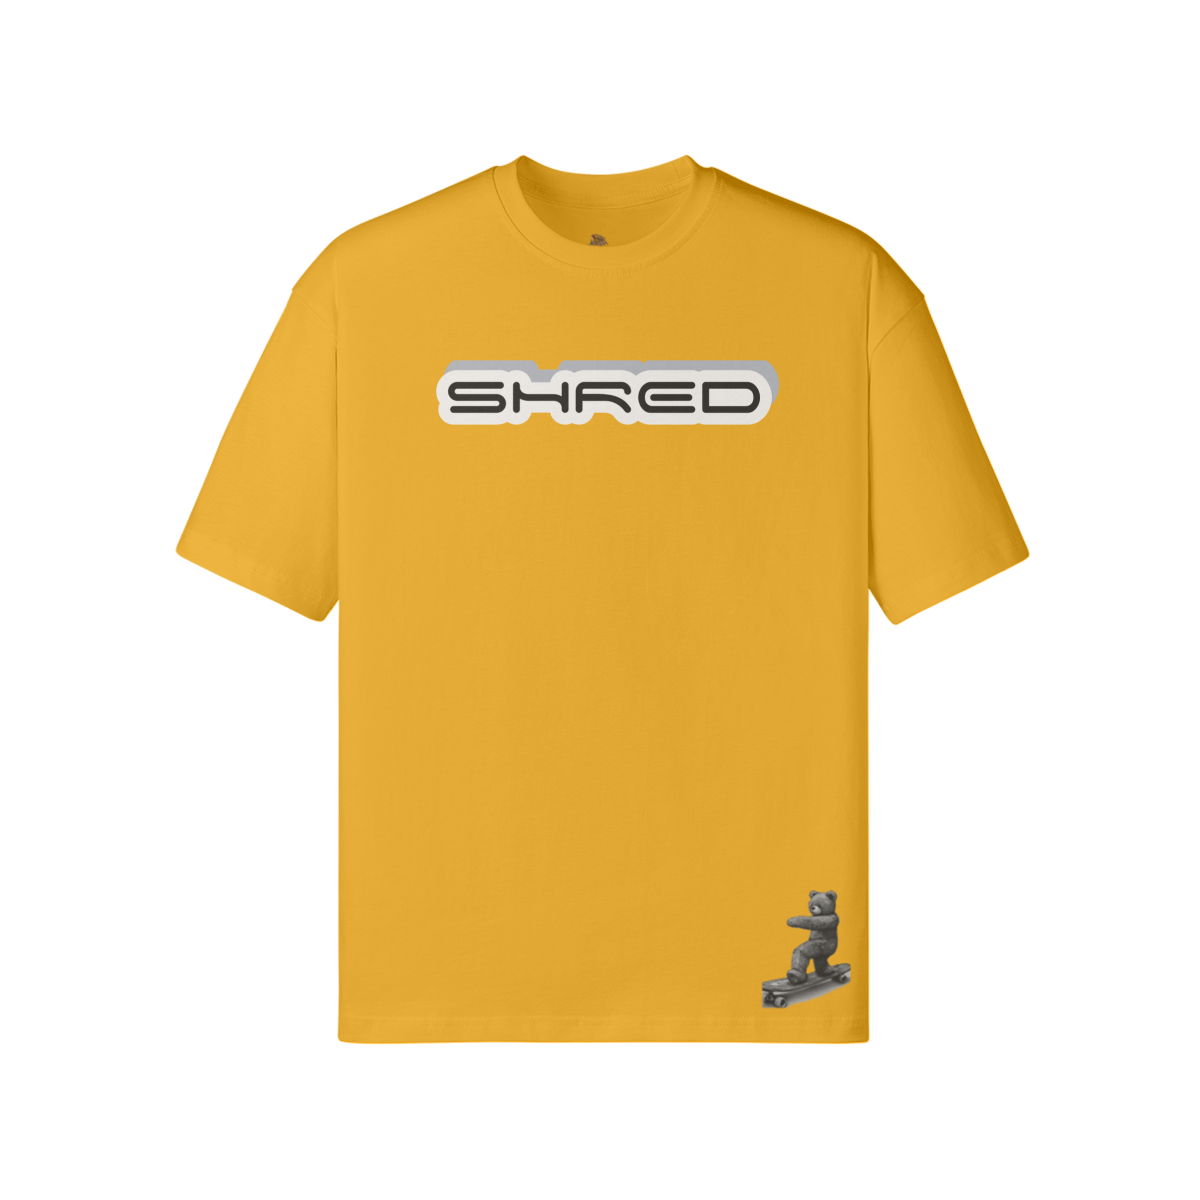 YELLOW - Teddy Ride Shred 190GSM Unisex Loose T-shirt - Unisex T-Shirt at TFC&H Co.